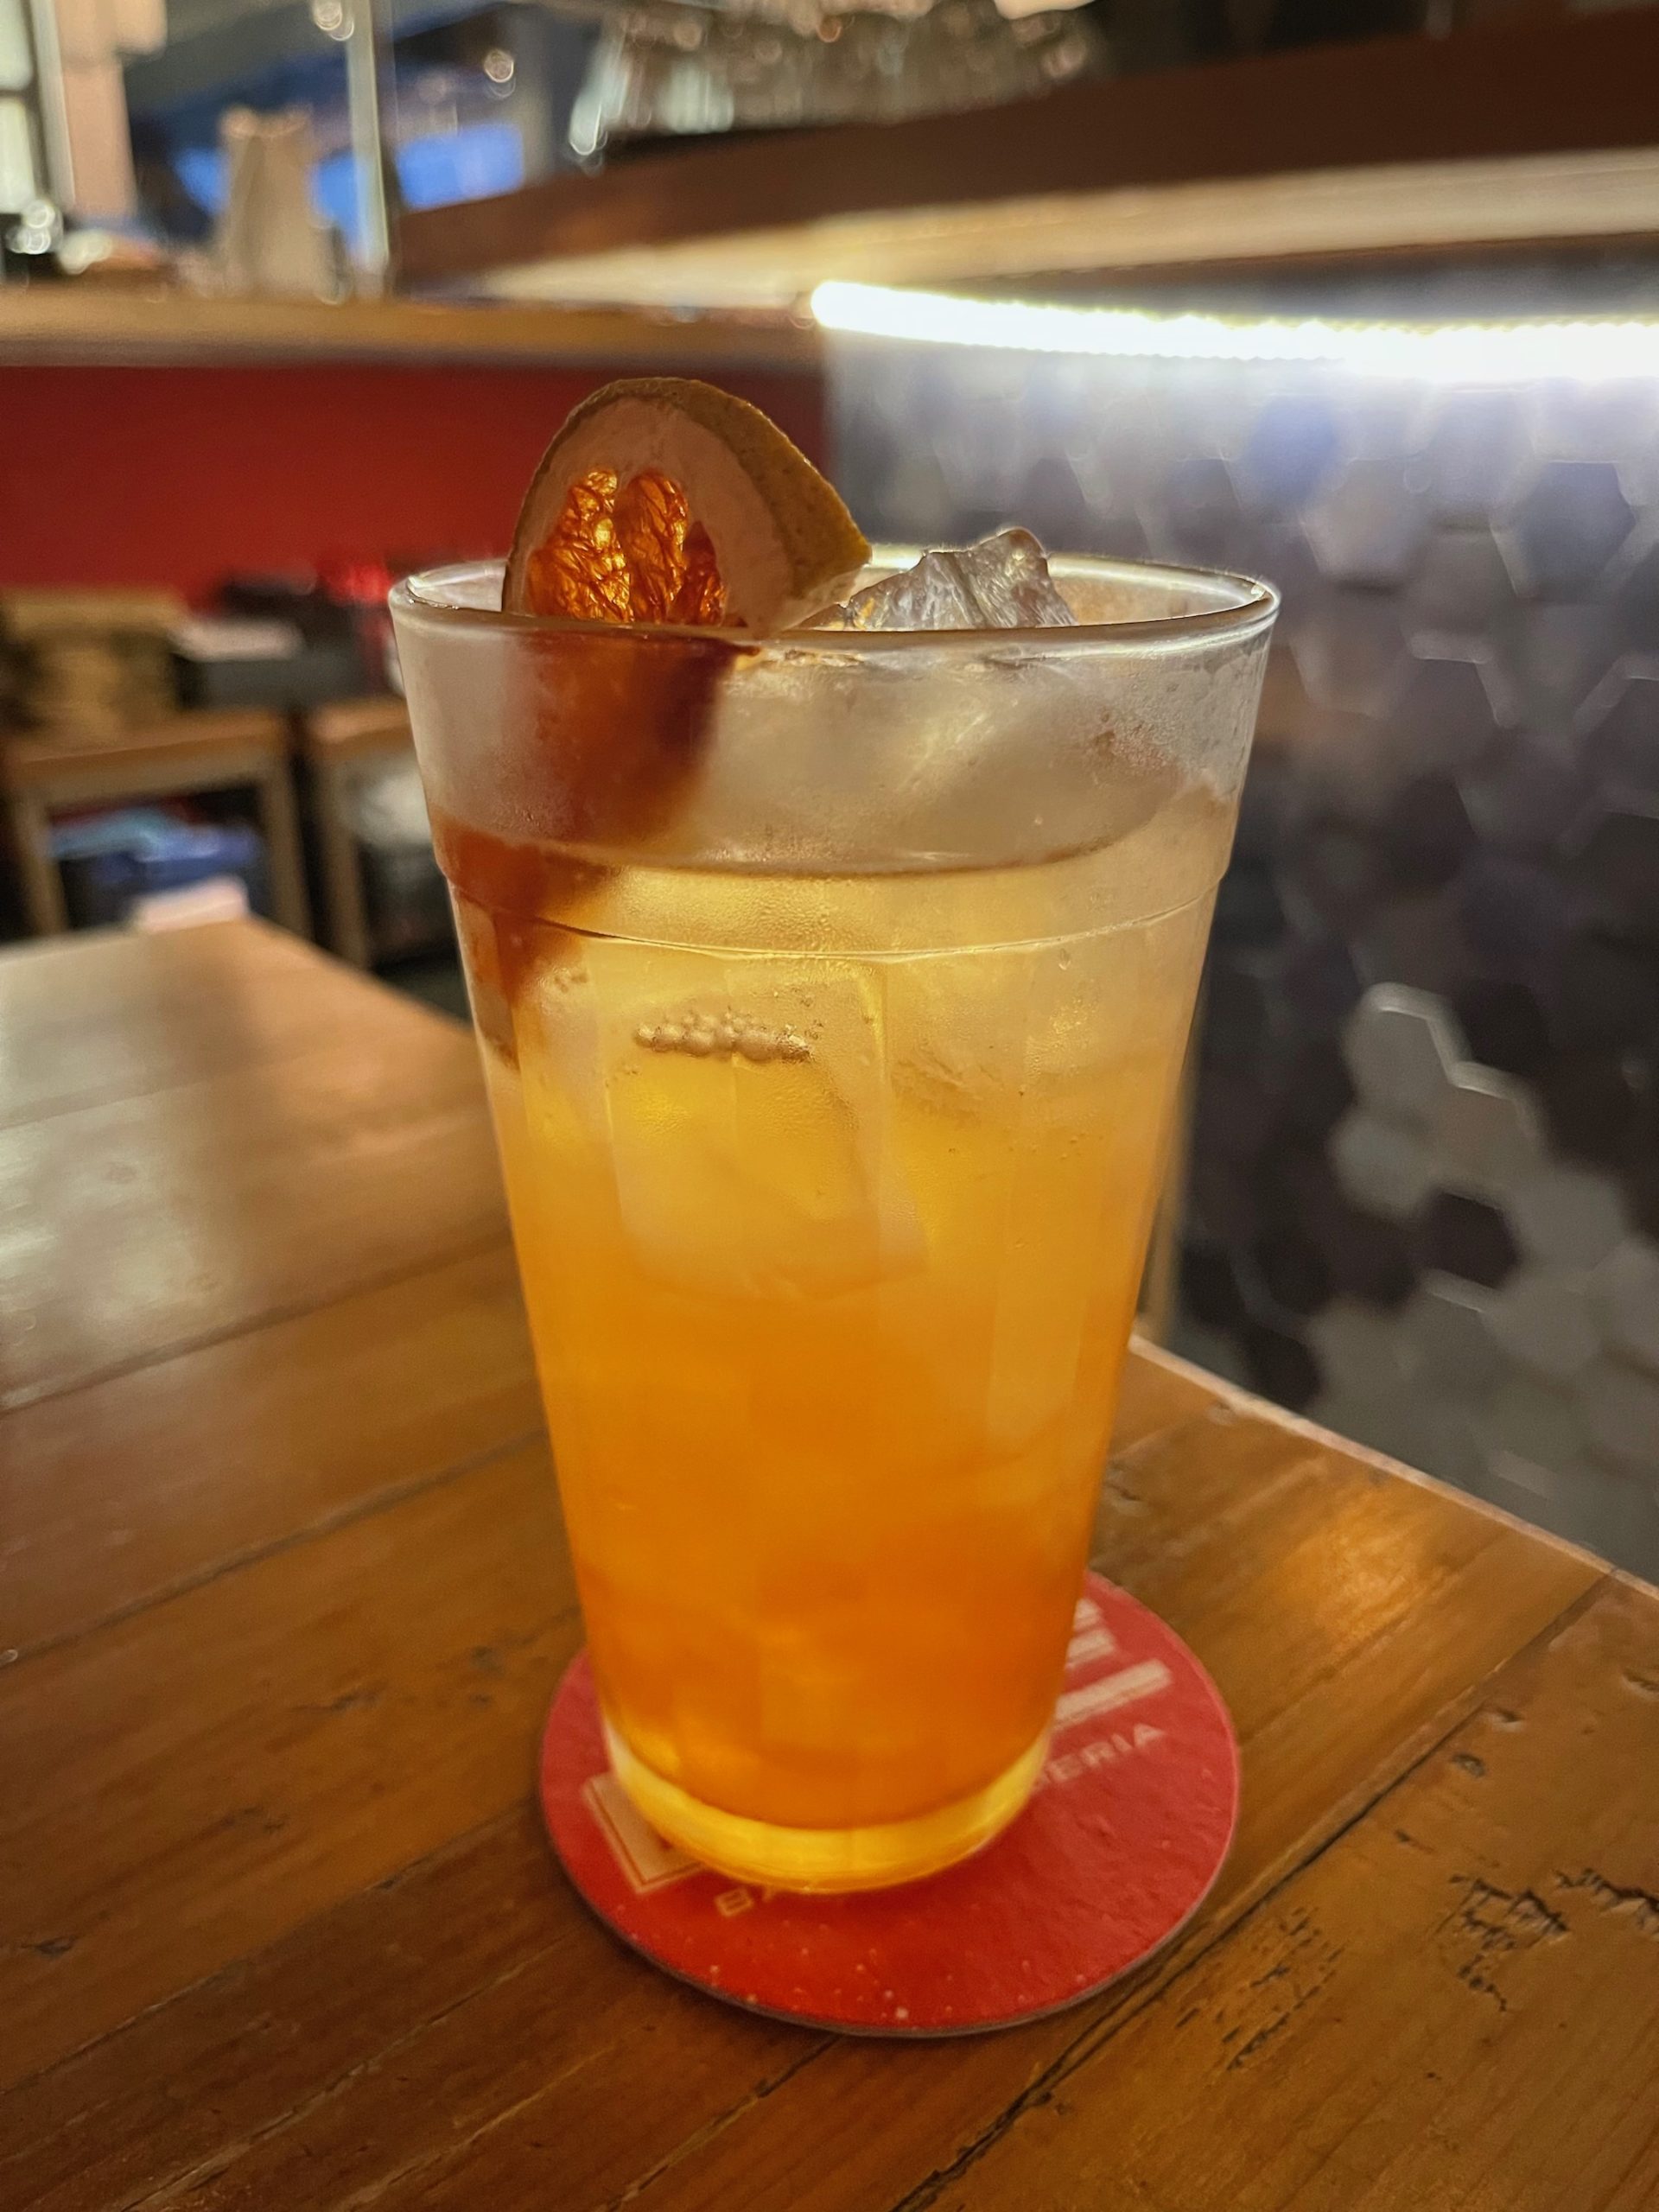 a glass of orange liquid with ice and a slice of orange on a coaster